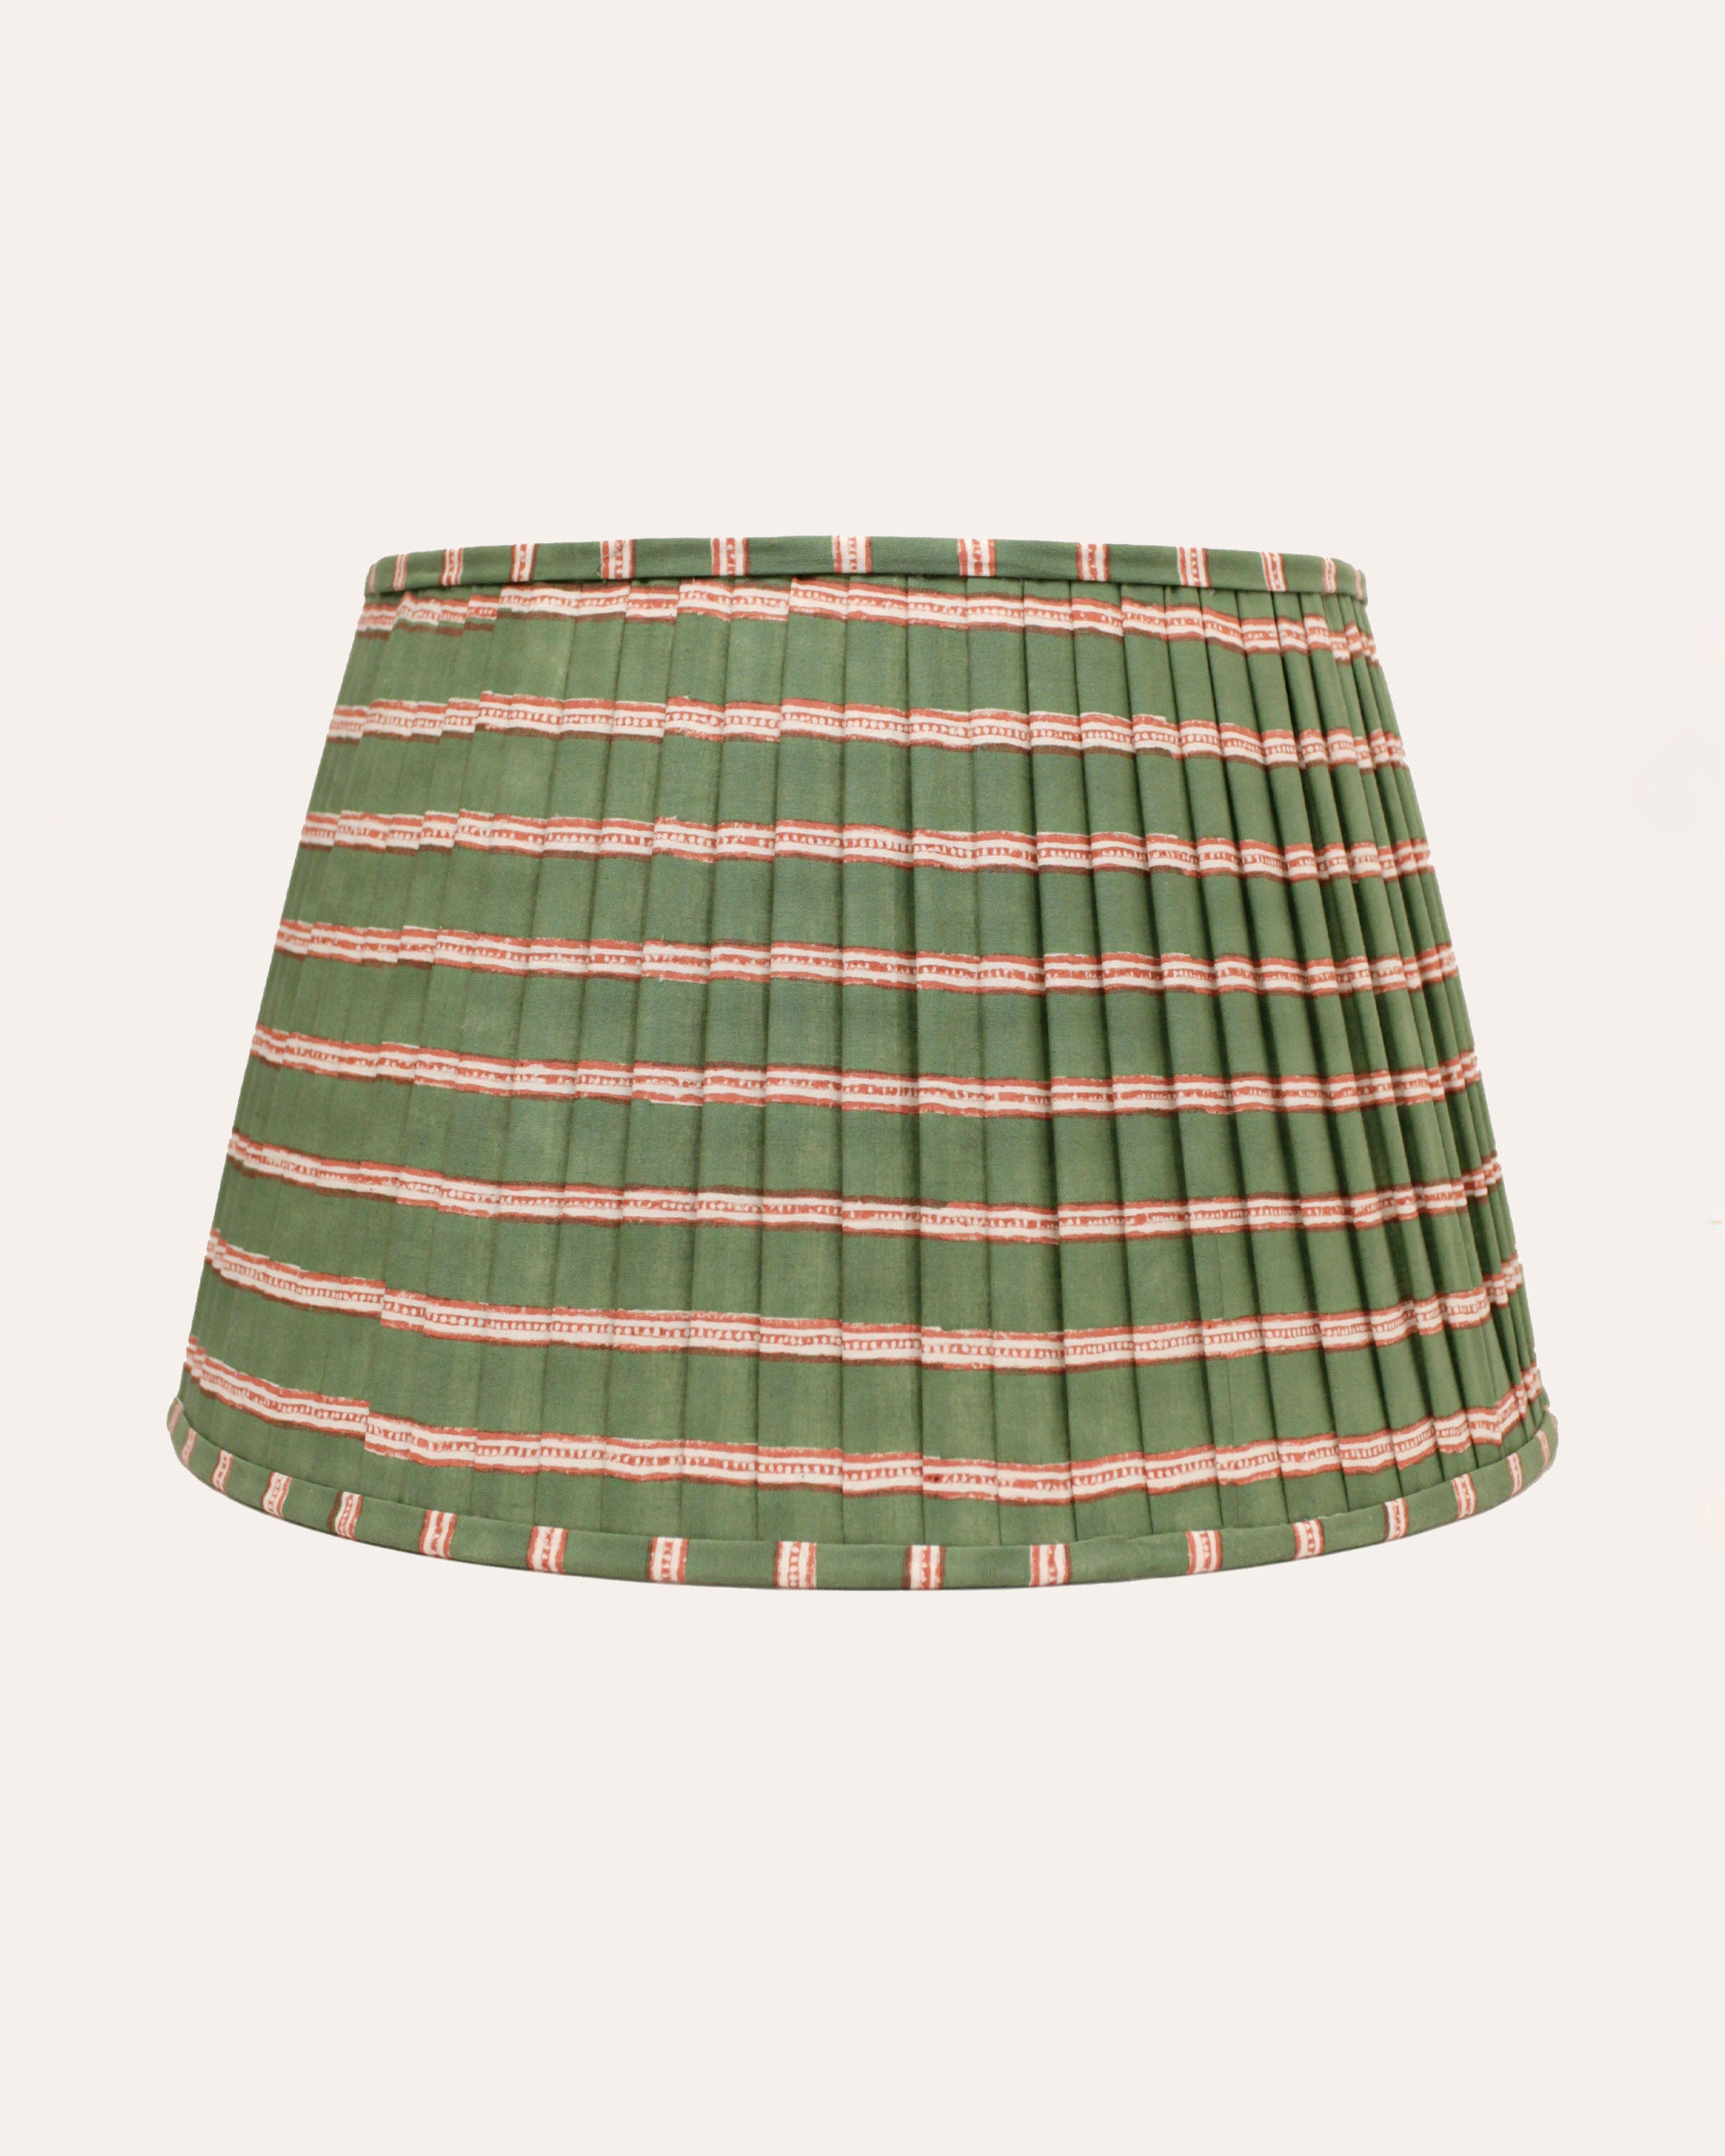 Edo Stripe Pleated Lampshade - Moss Green & Pink – Birdie Fortescue